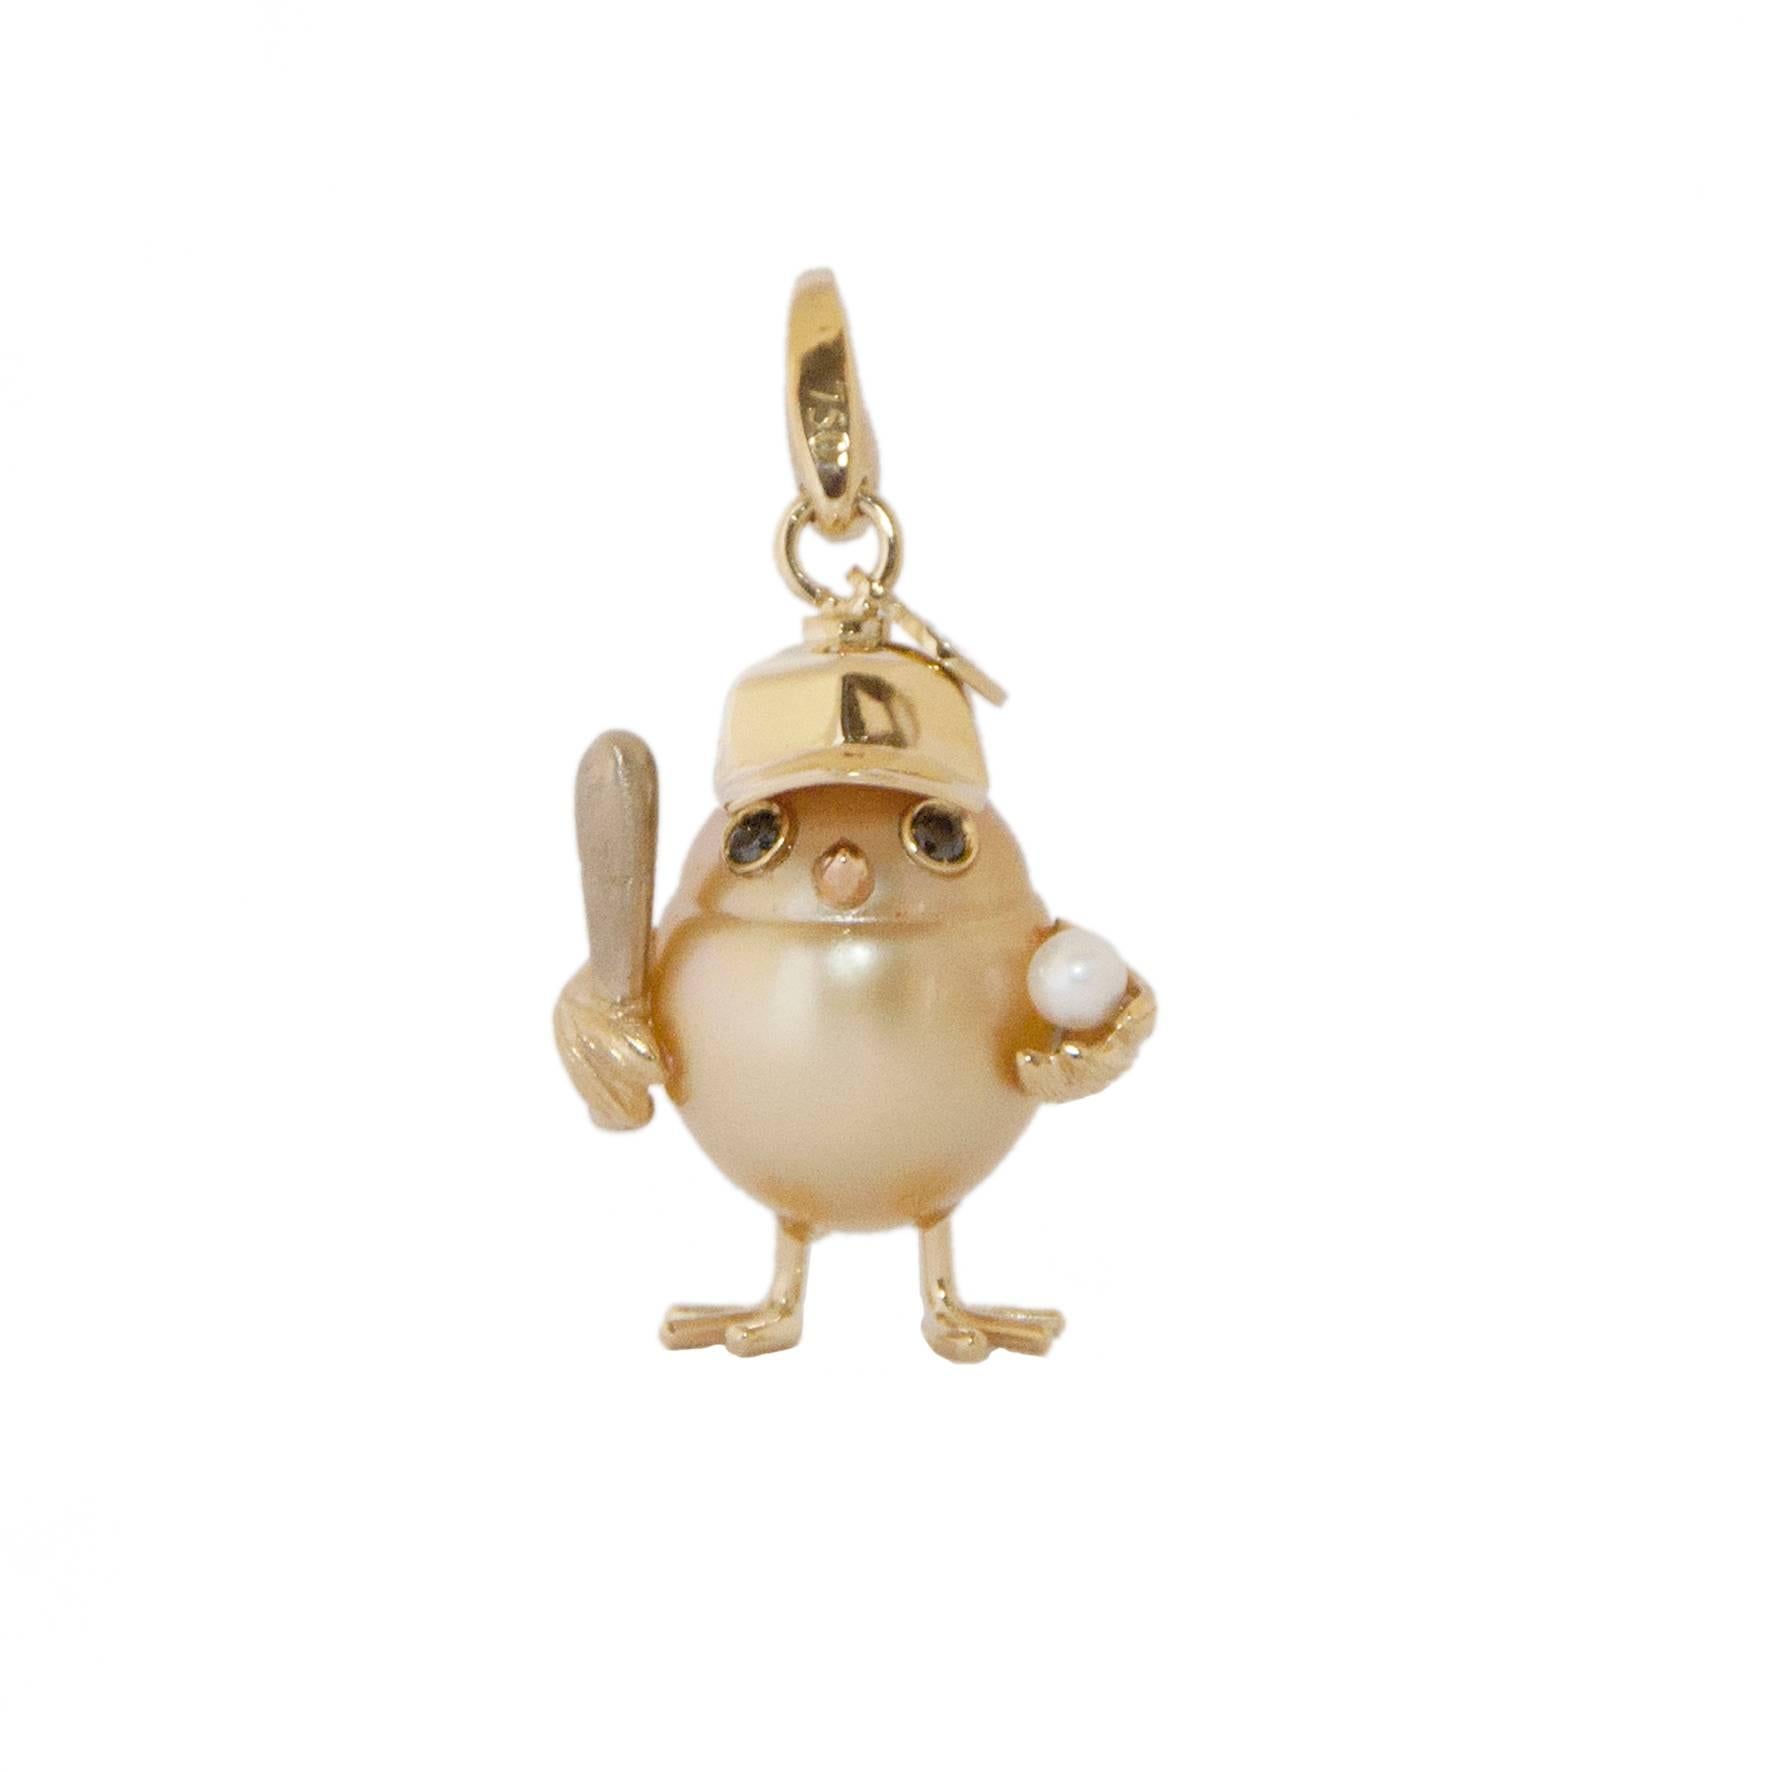 Baseball Player Chick Black Diamond 18K Gold Pearl Charm and Pendant or Necklace